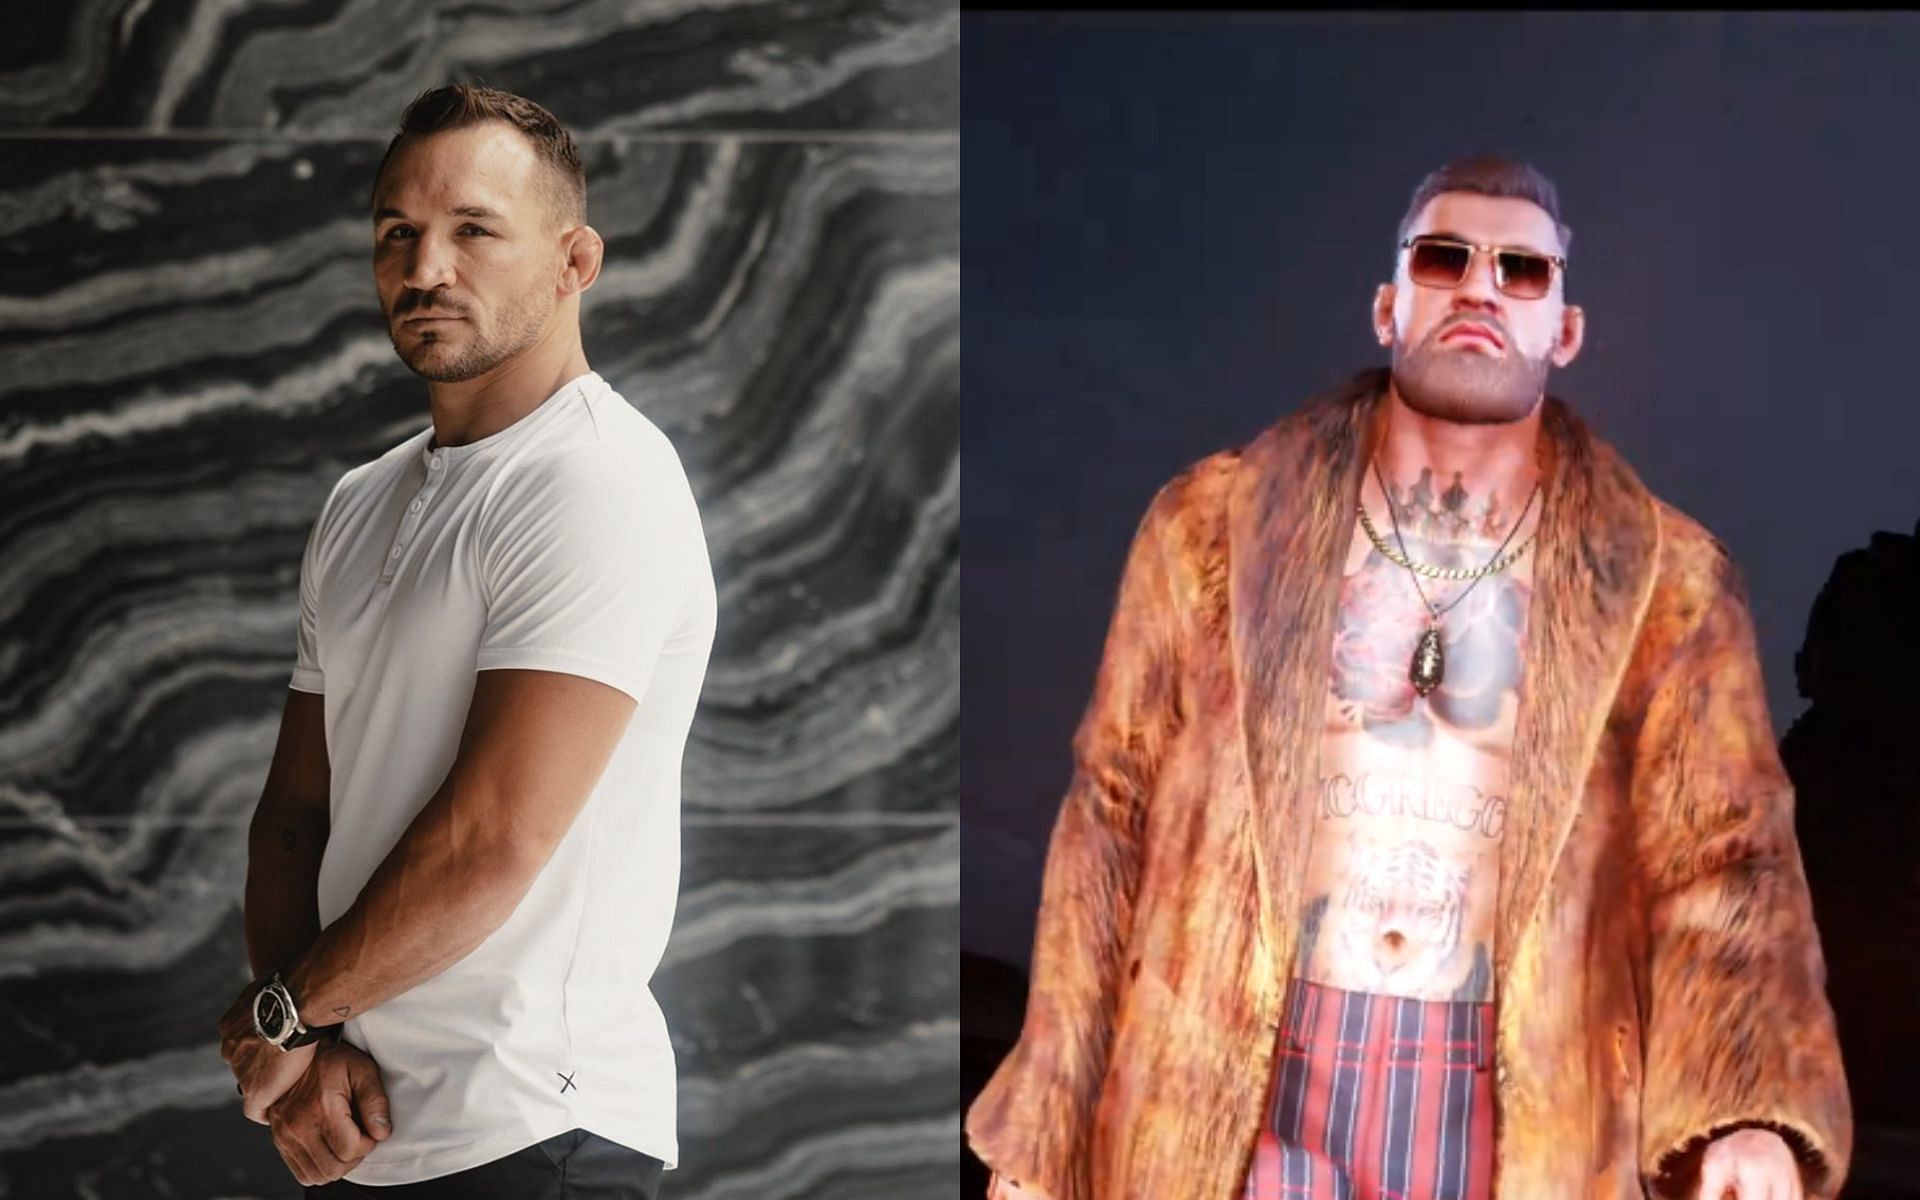 Michael Chandler (left) sends a cryptic message to Conor McGregor and his character in Hitman (right) on the day of UFC 303. [Images courtesy: @mikechandlermma on Instagram and @hitman on X]